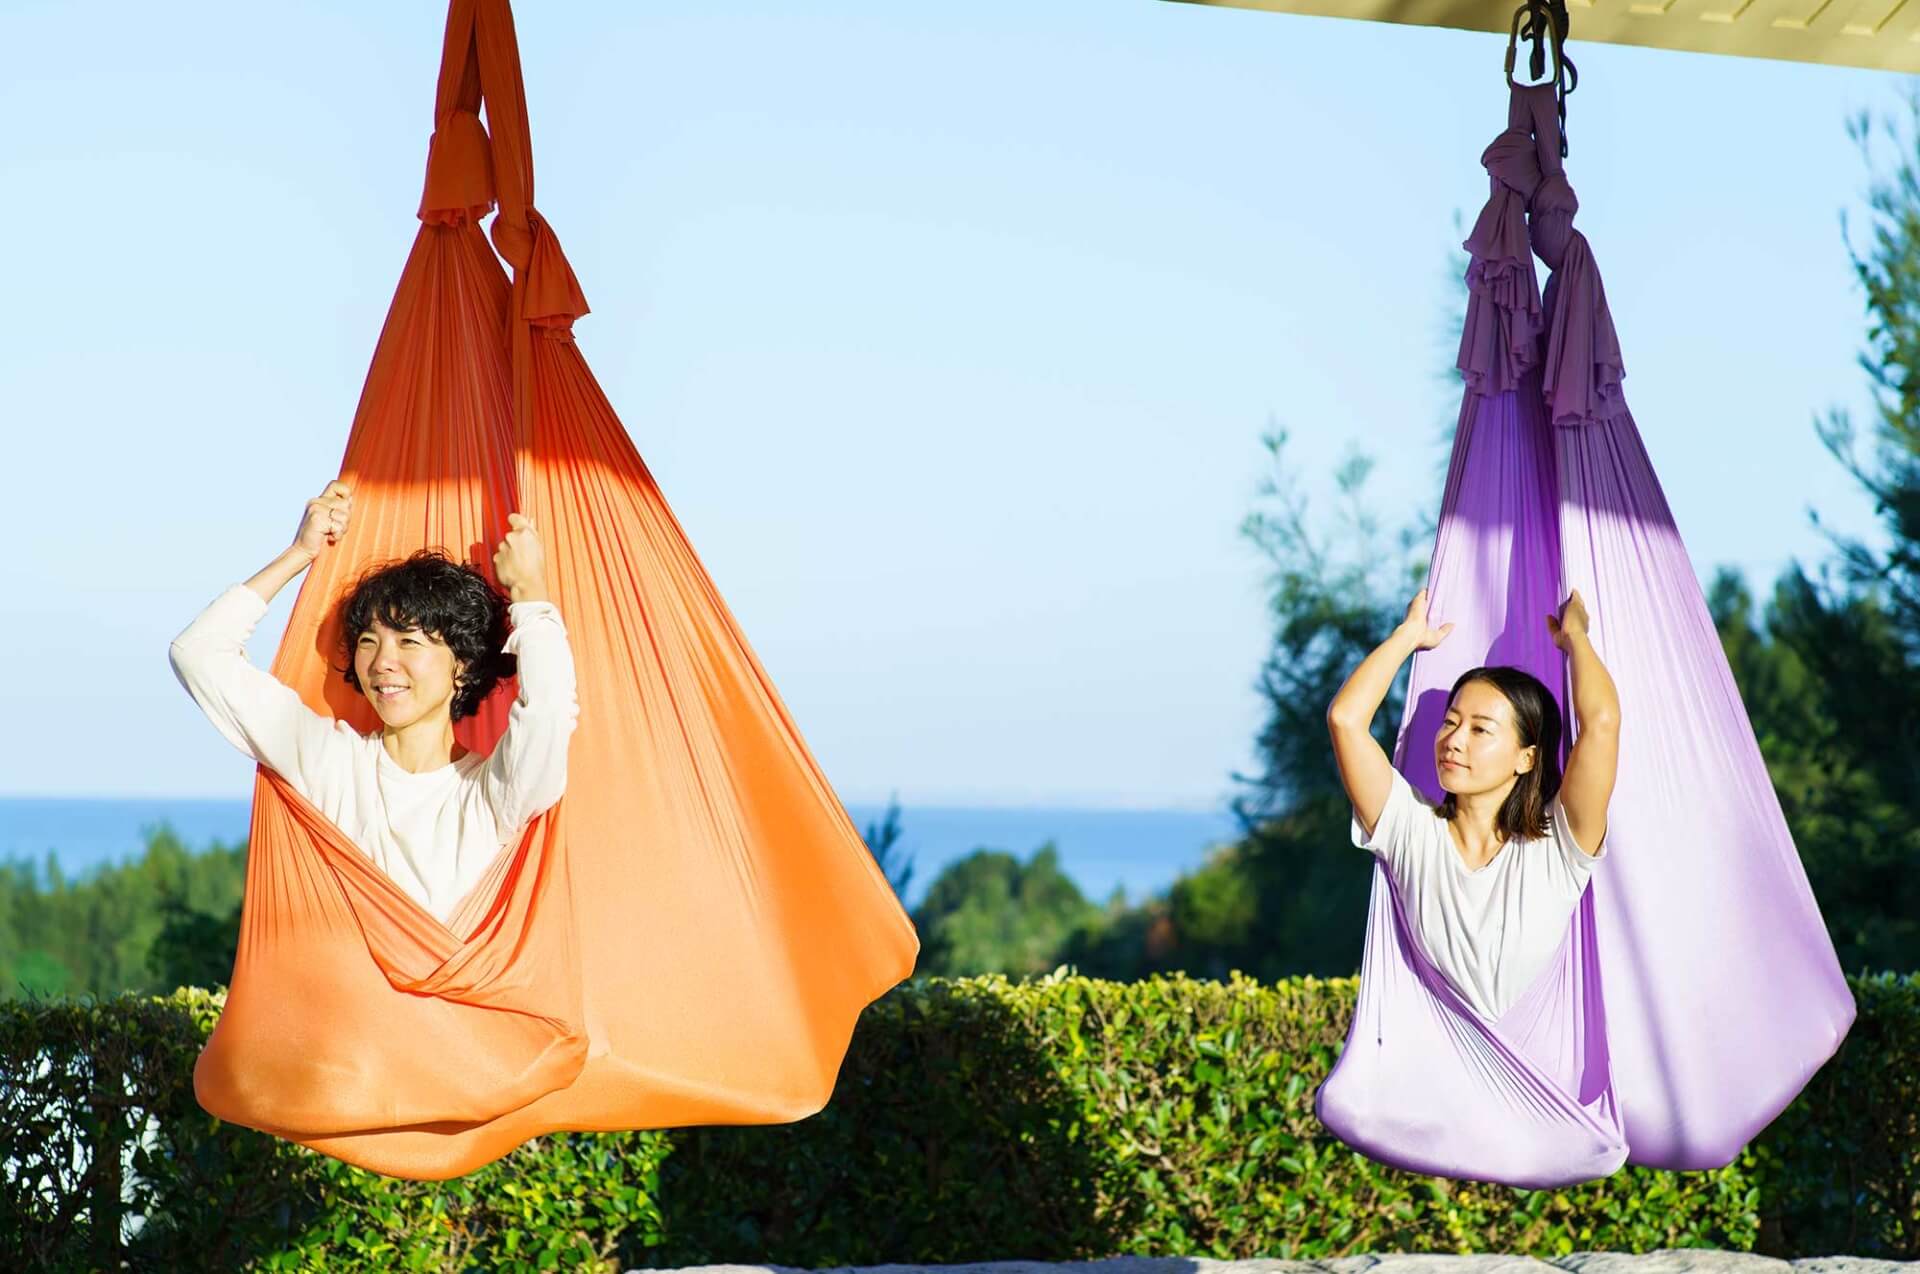 Aerial yoga, one of the hotel's activities, gives you the yoga experience while being comfortably wrapped in a hammock.